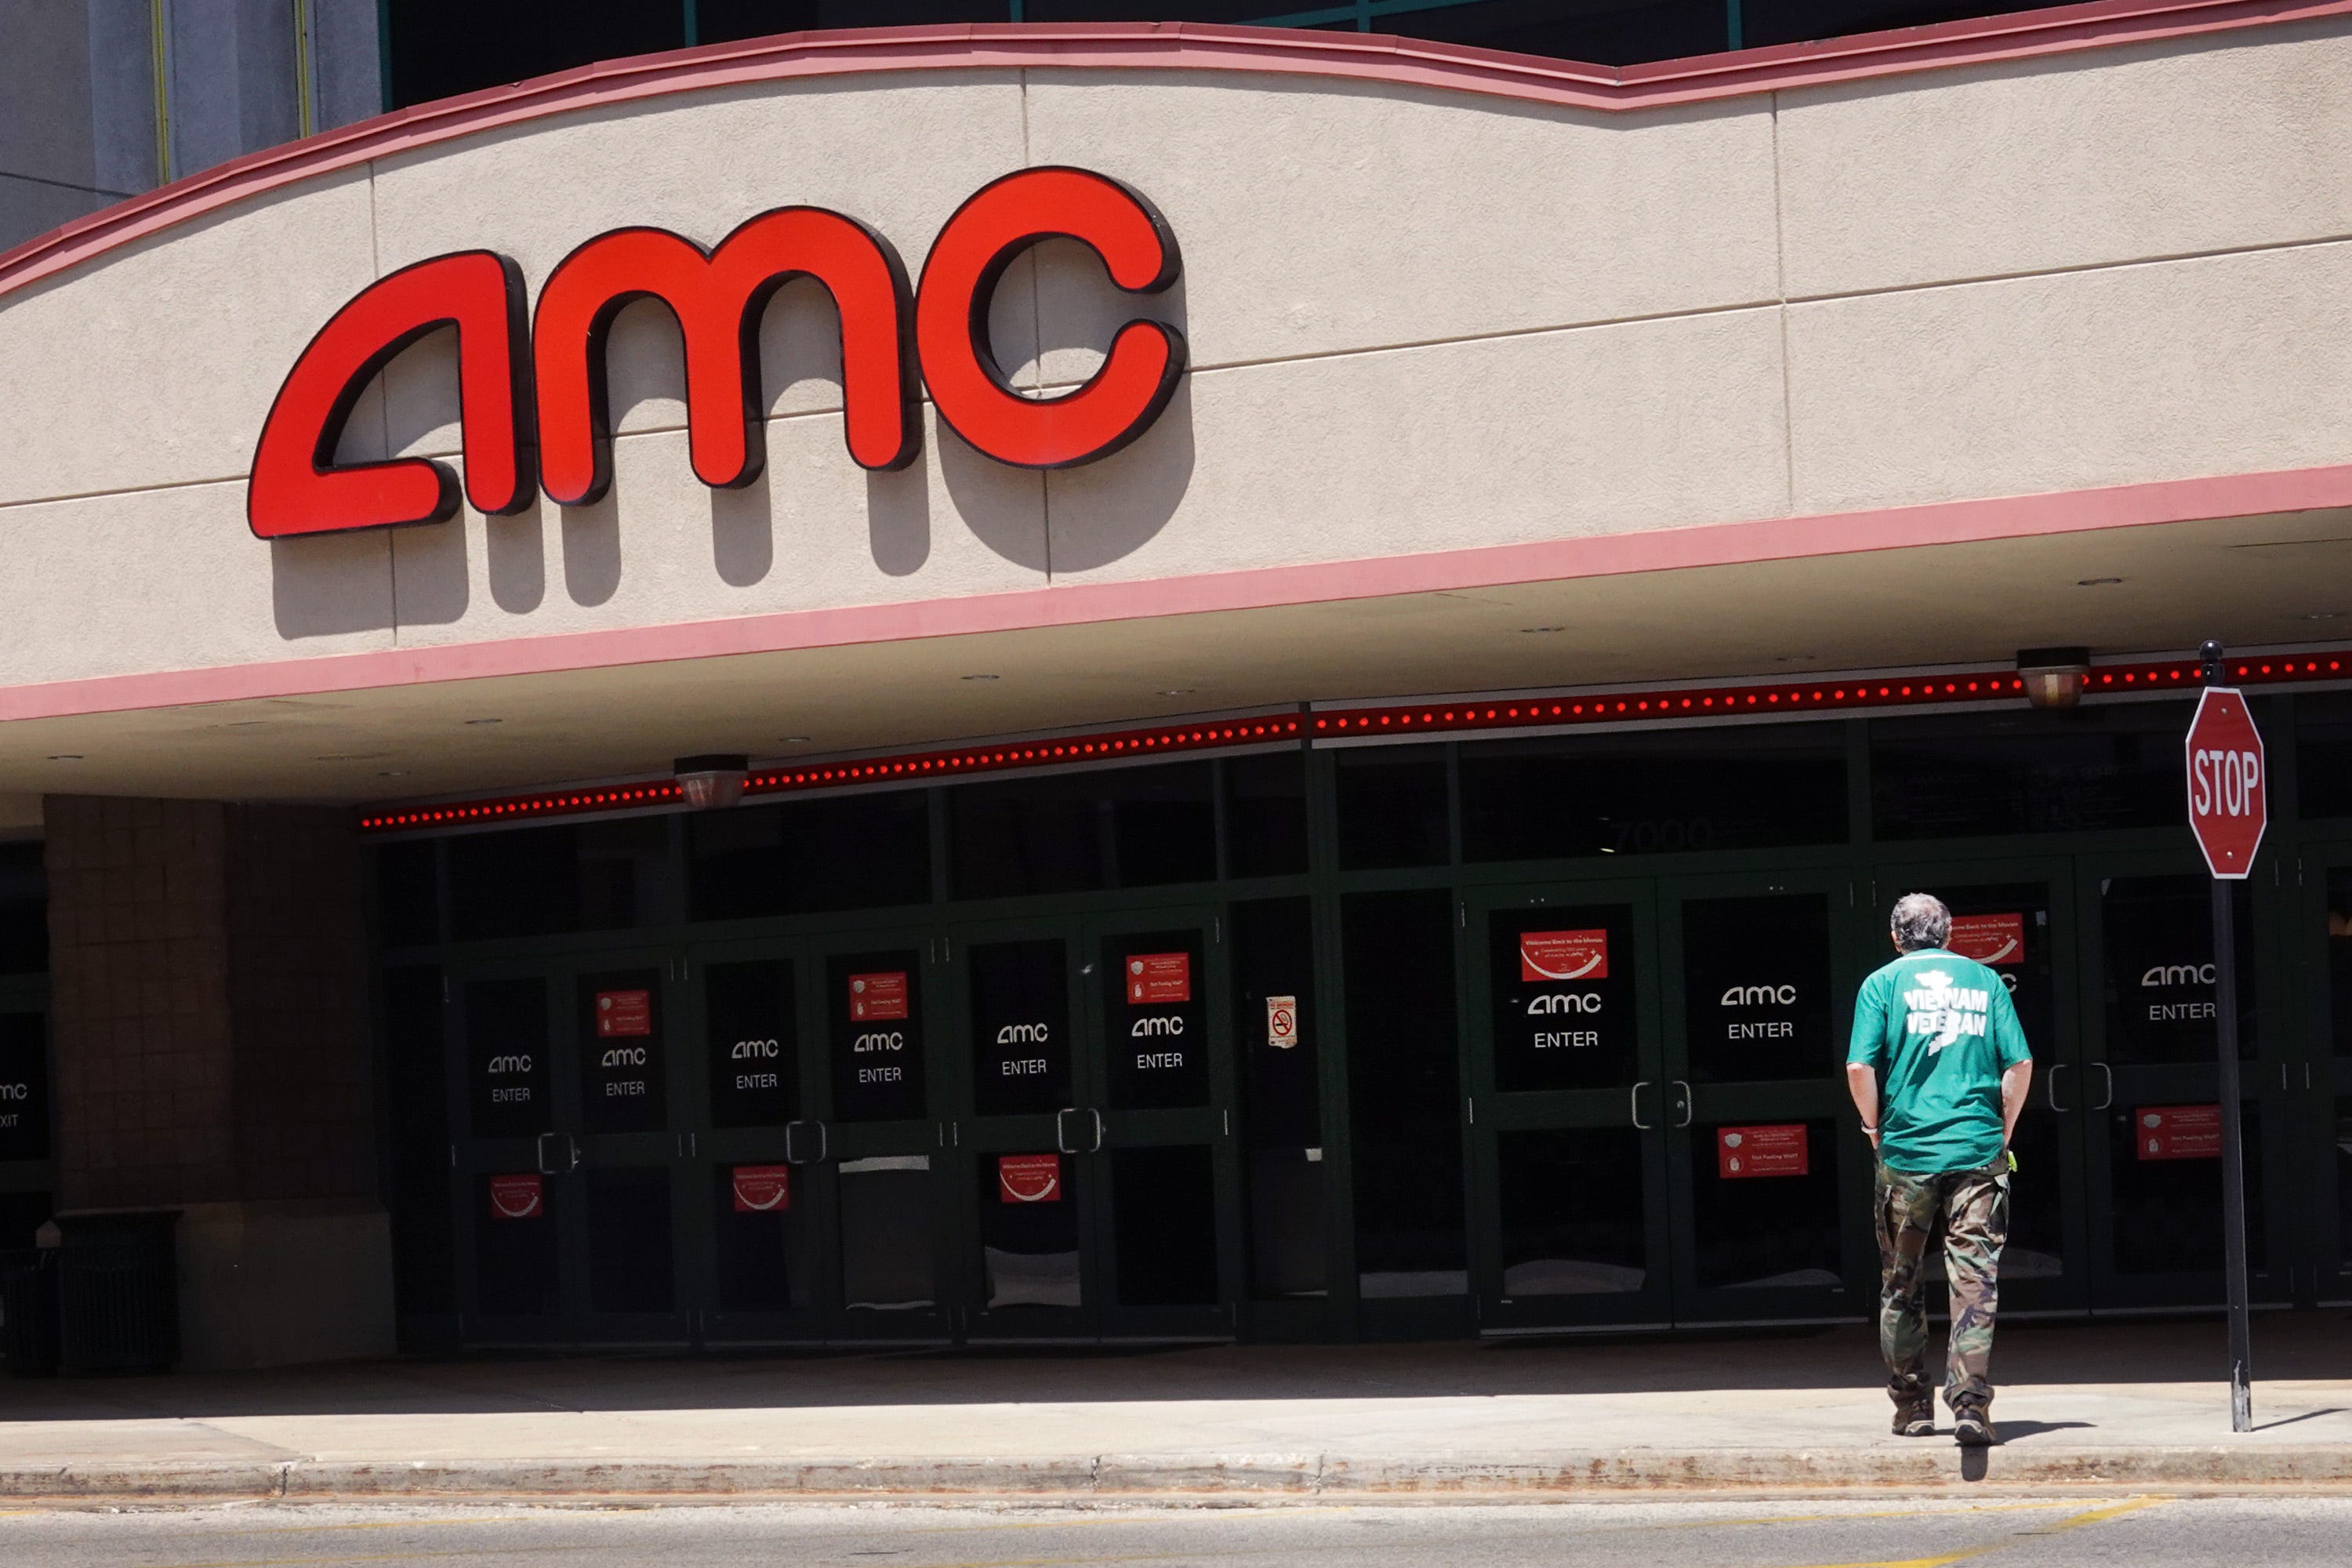 AMC movie tickets could get cheaper or more expensive depending on where you sit